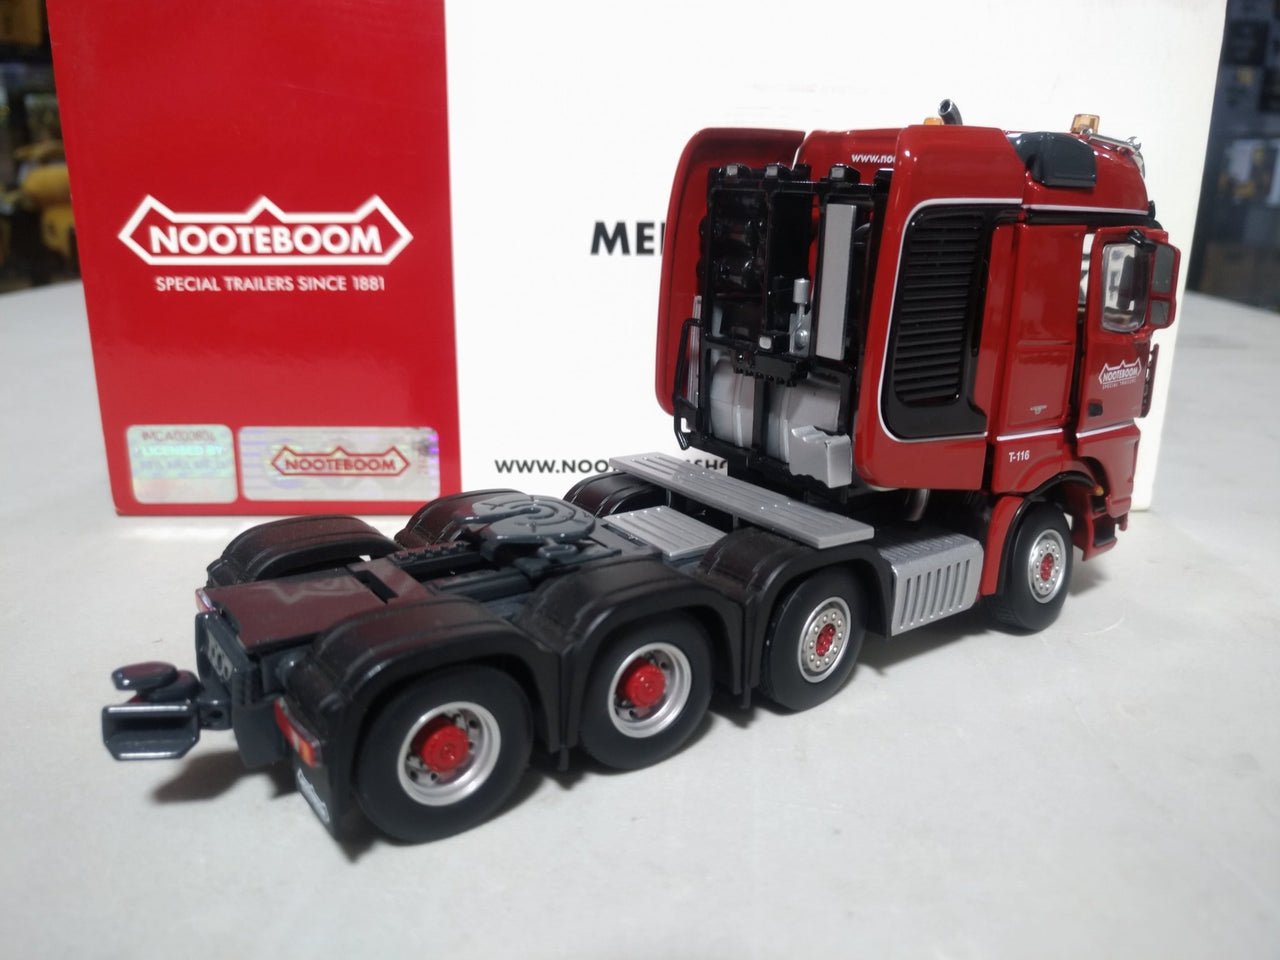 5722393 Nooteboom Tract Mercedes Benz Arocs SLT Bigspace 8X4 Scale 1:50 (Limited Edition) Discontinued Model